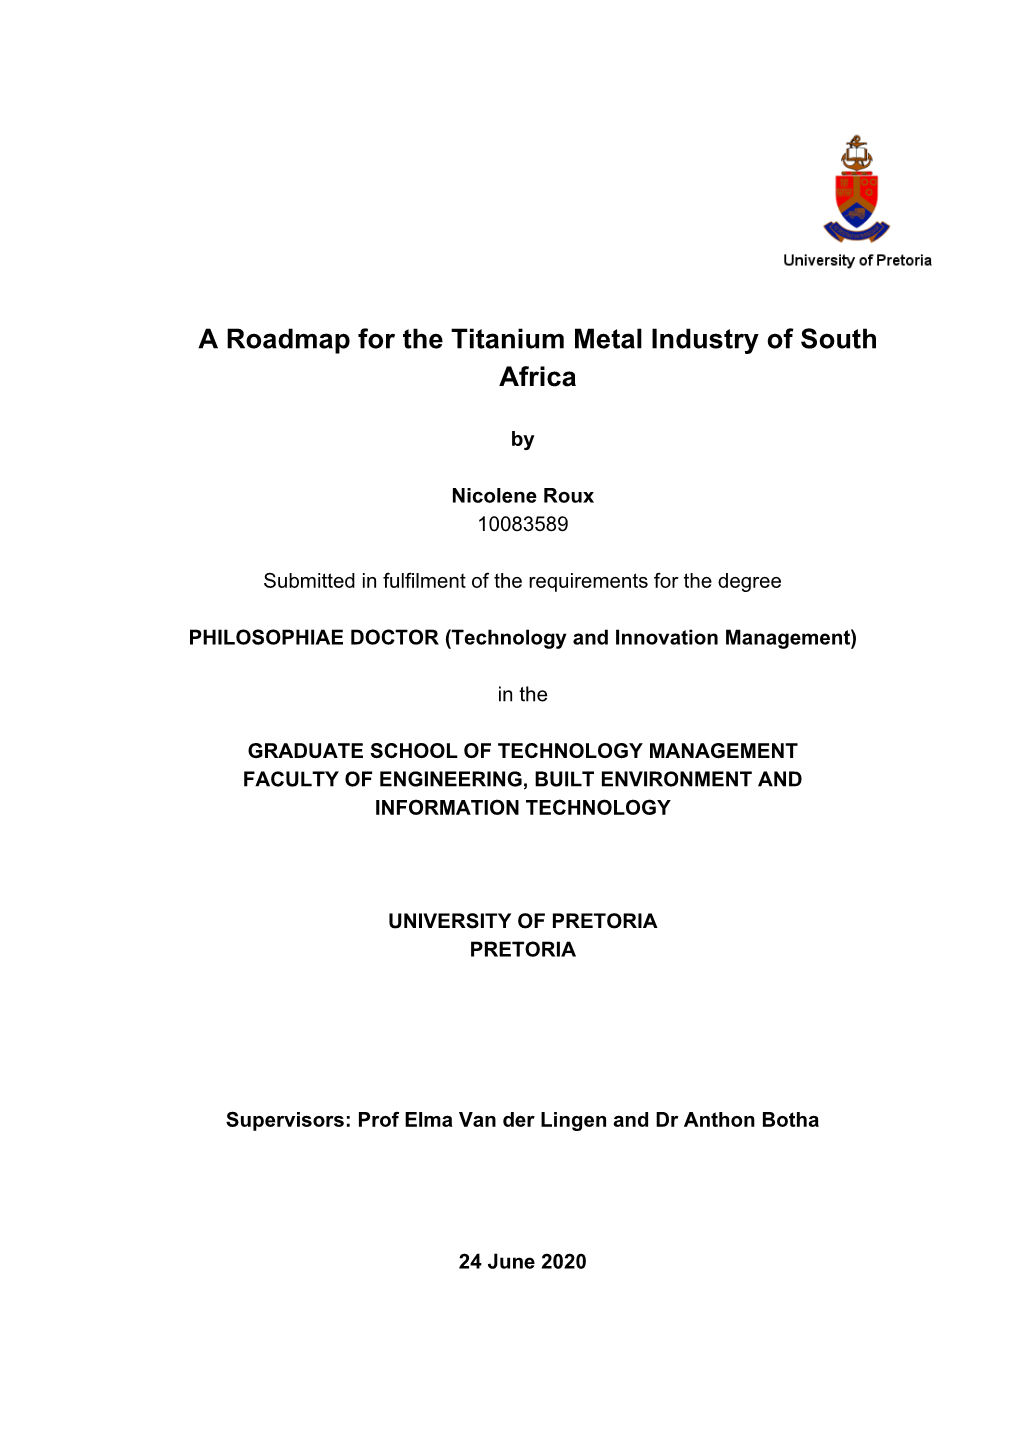 A Roadmap for the Titanium Metal Industry of South Africa